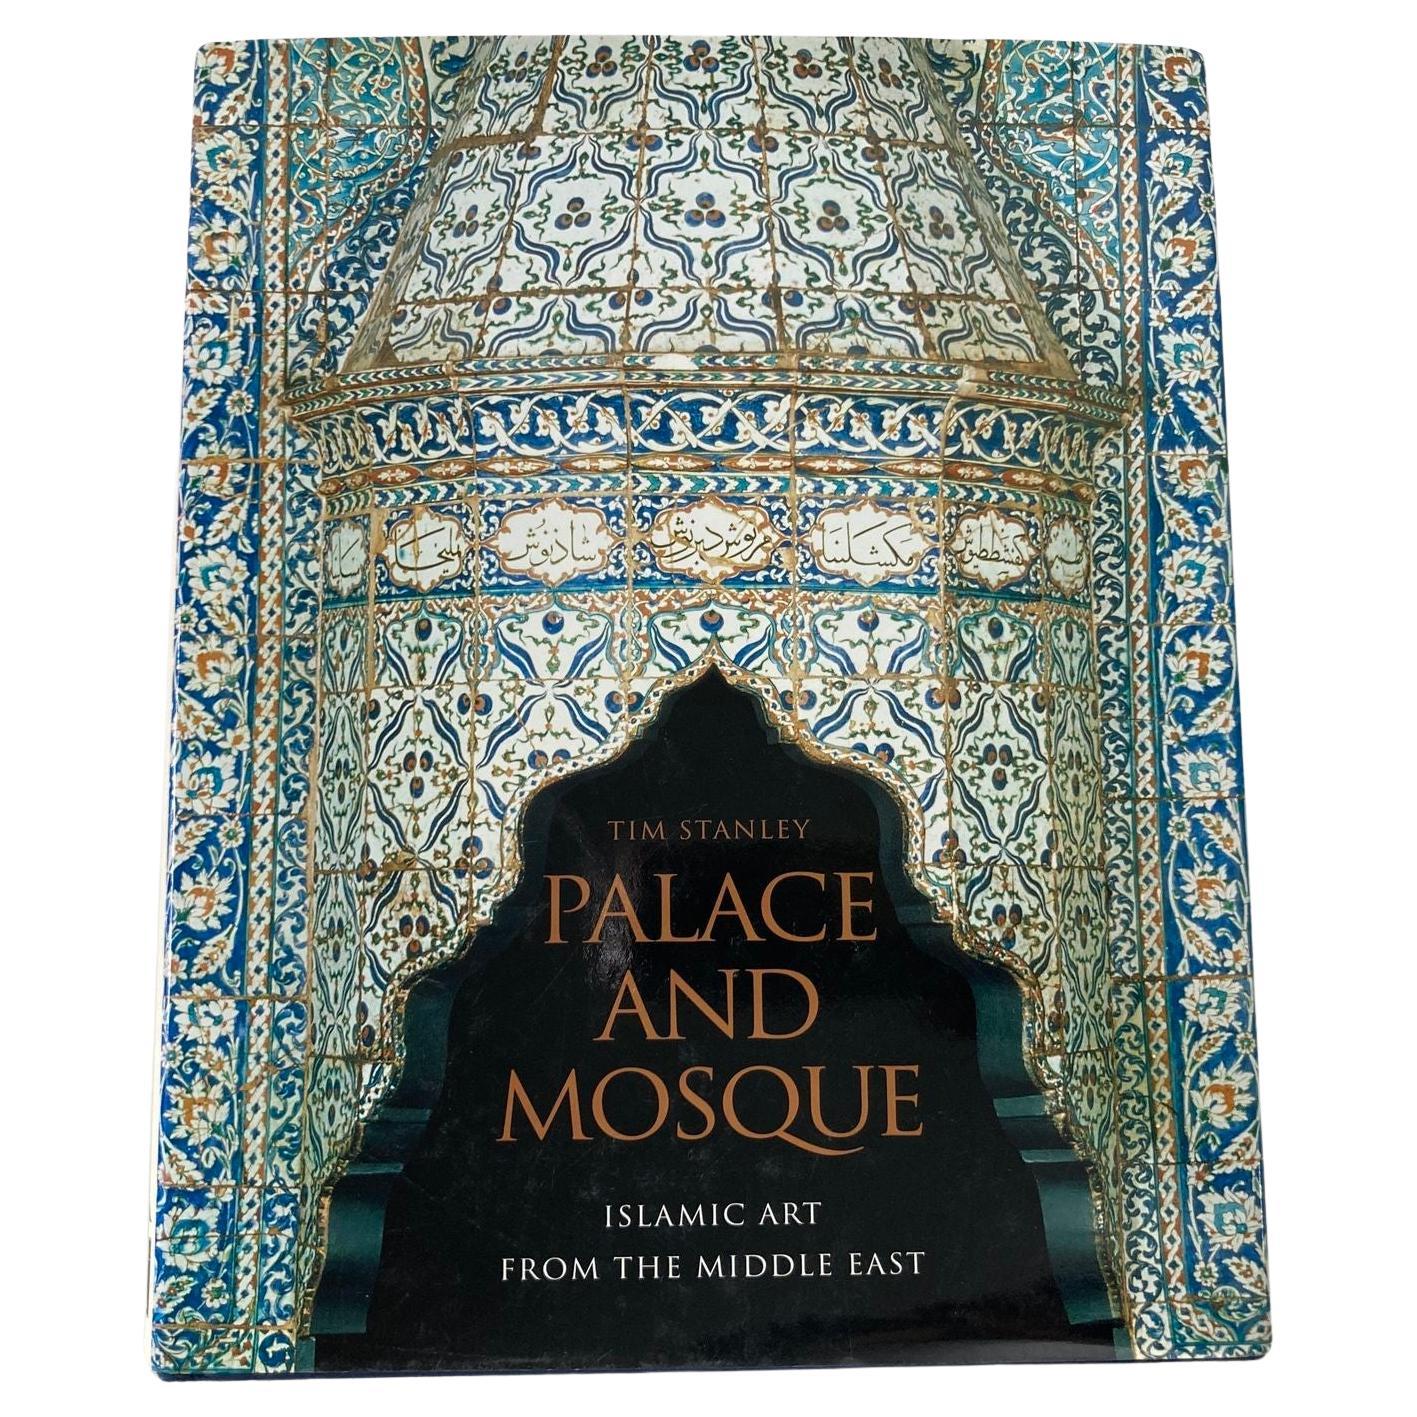 Palace and Mosque : Islamic Art from the Middle East Book by Tim Stanley For Sale